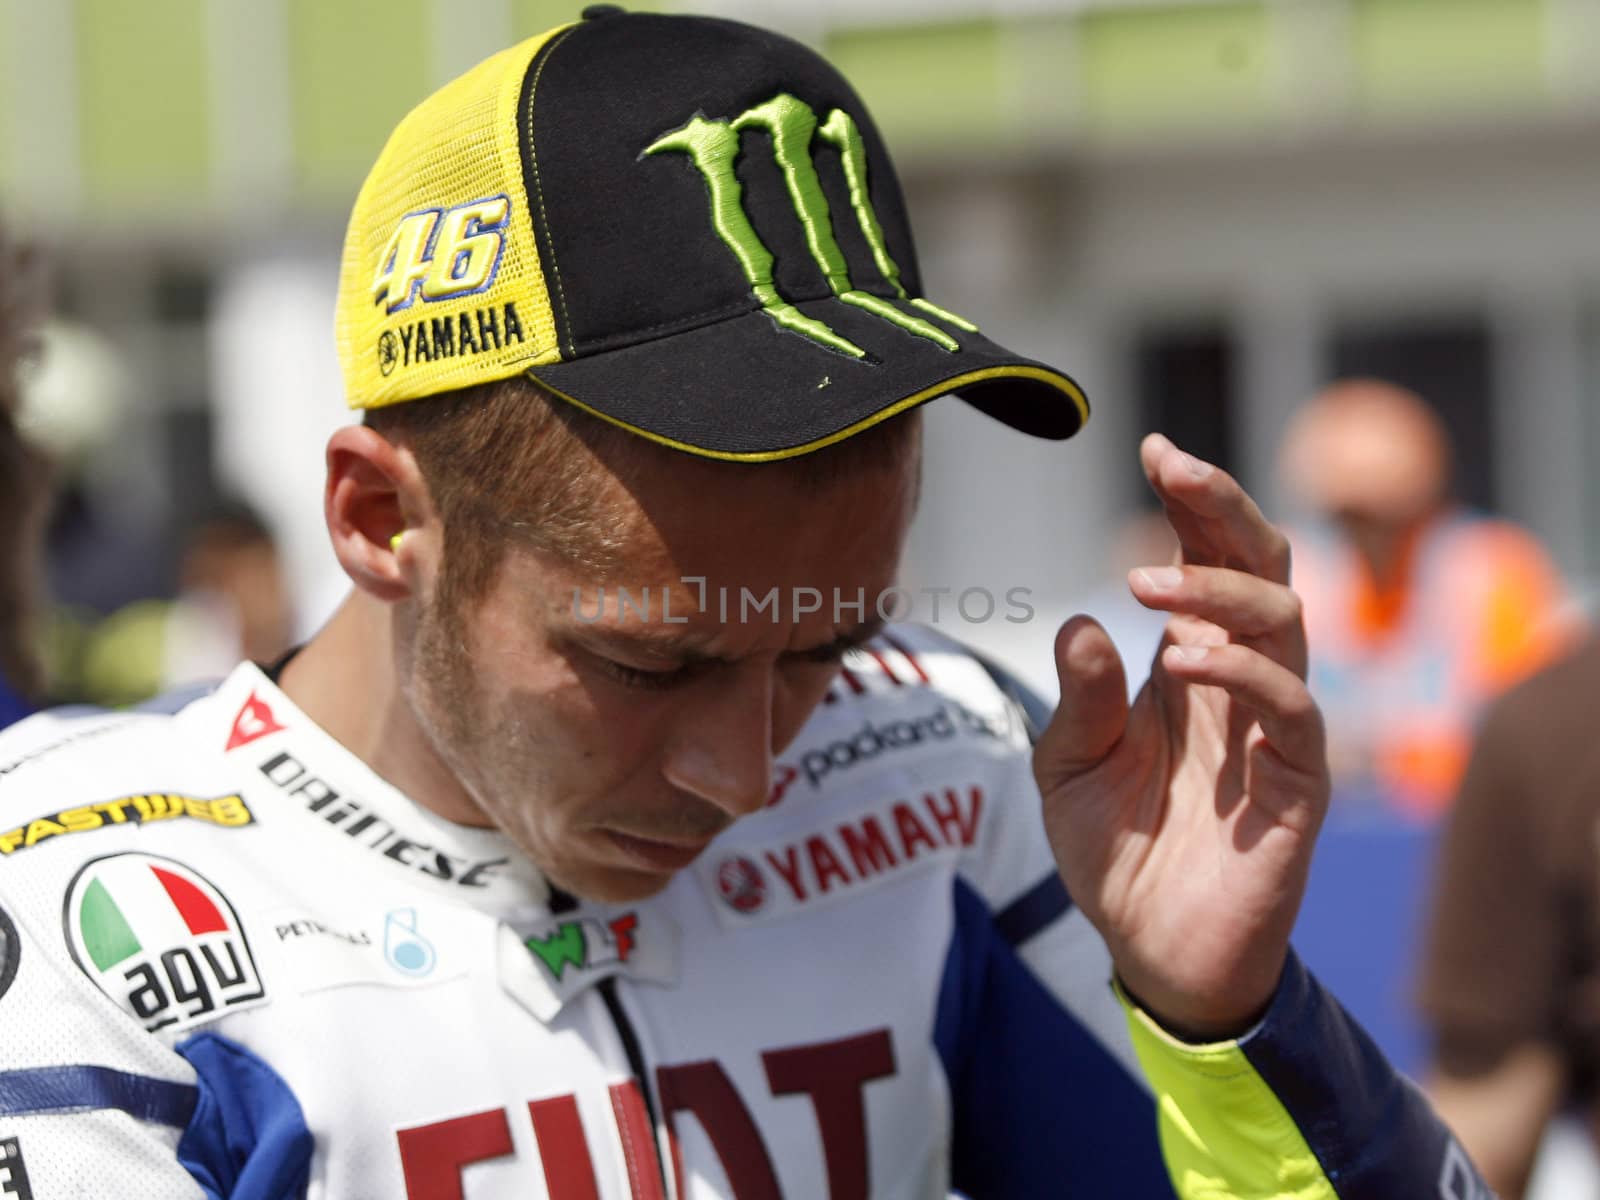 Valentino Rossi change Yamaha team for Ducati by haak78